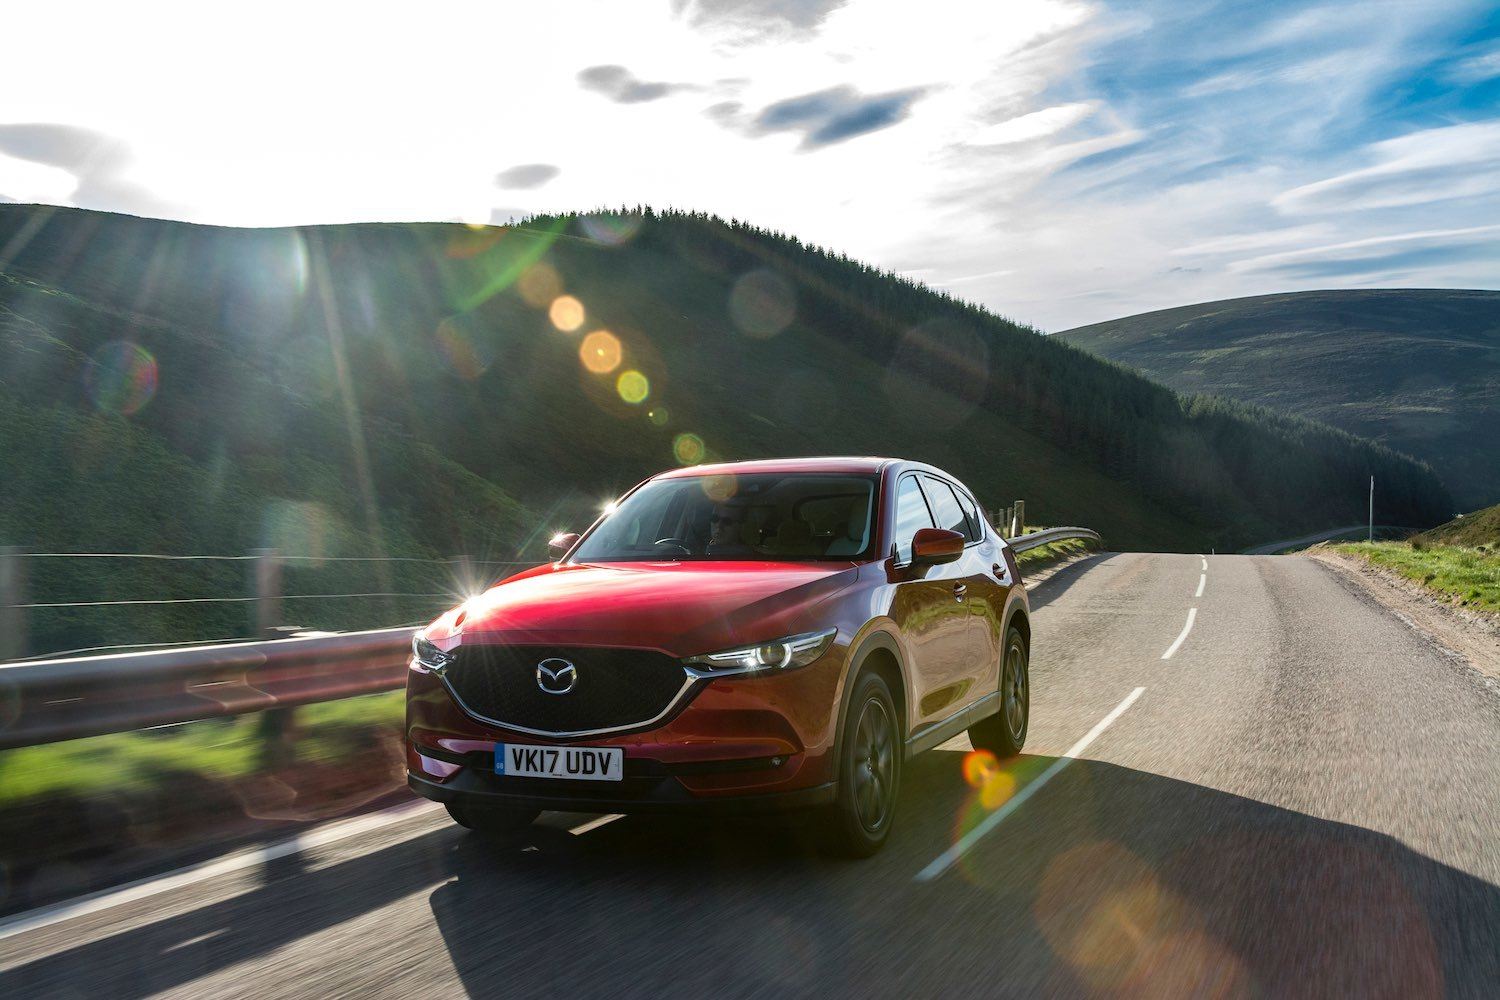 Tom Scanlan reviews the all new Mazda CX-5 in the Cairngorms Scotland for drive 16